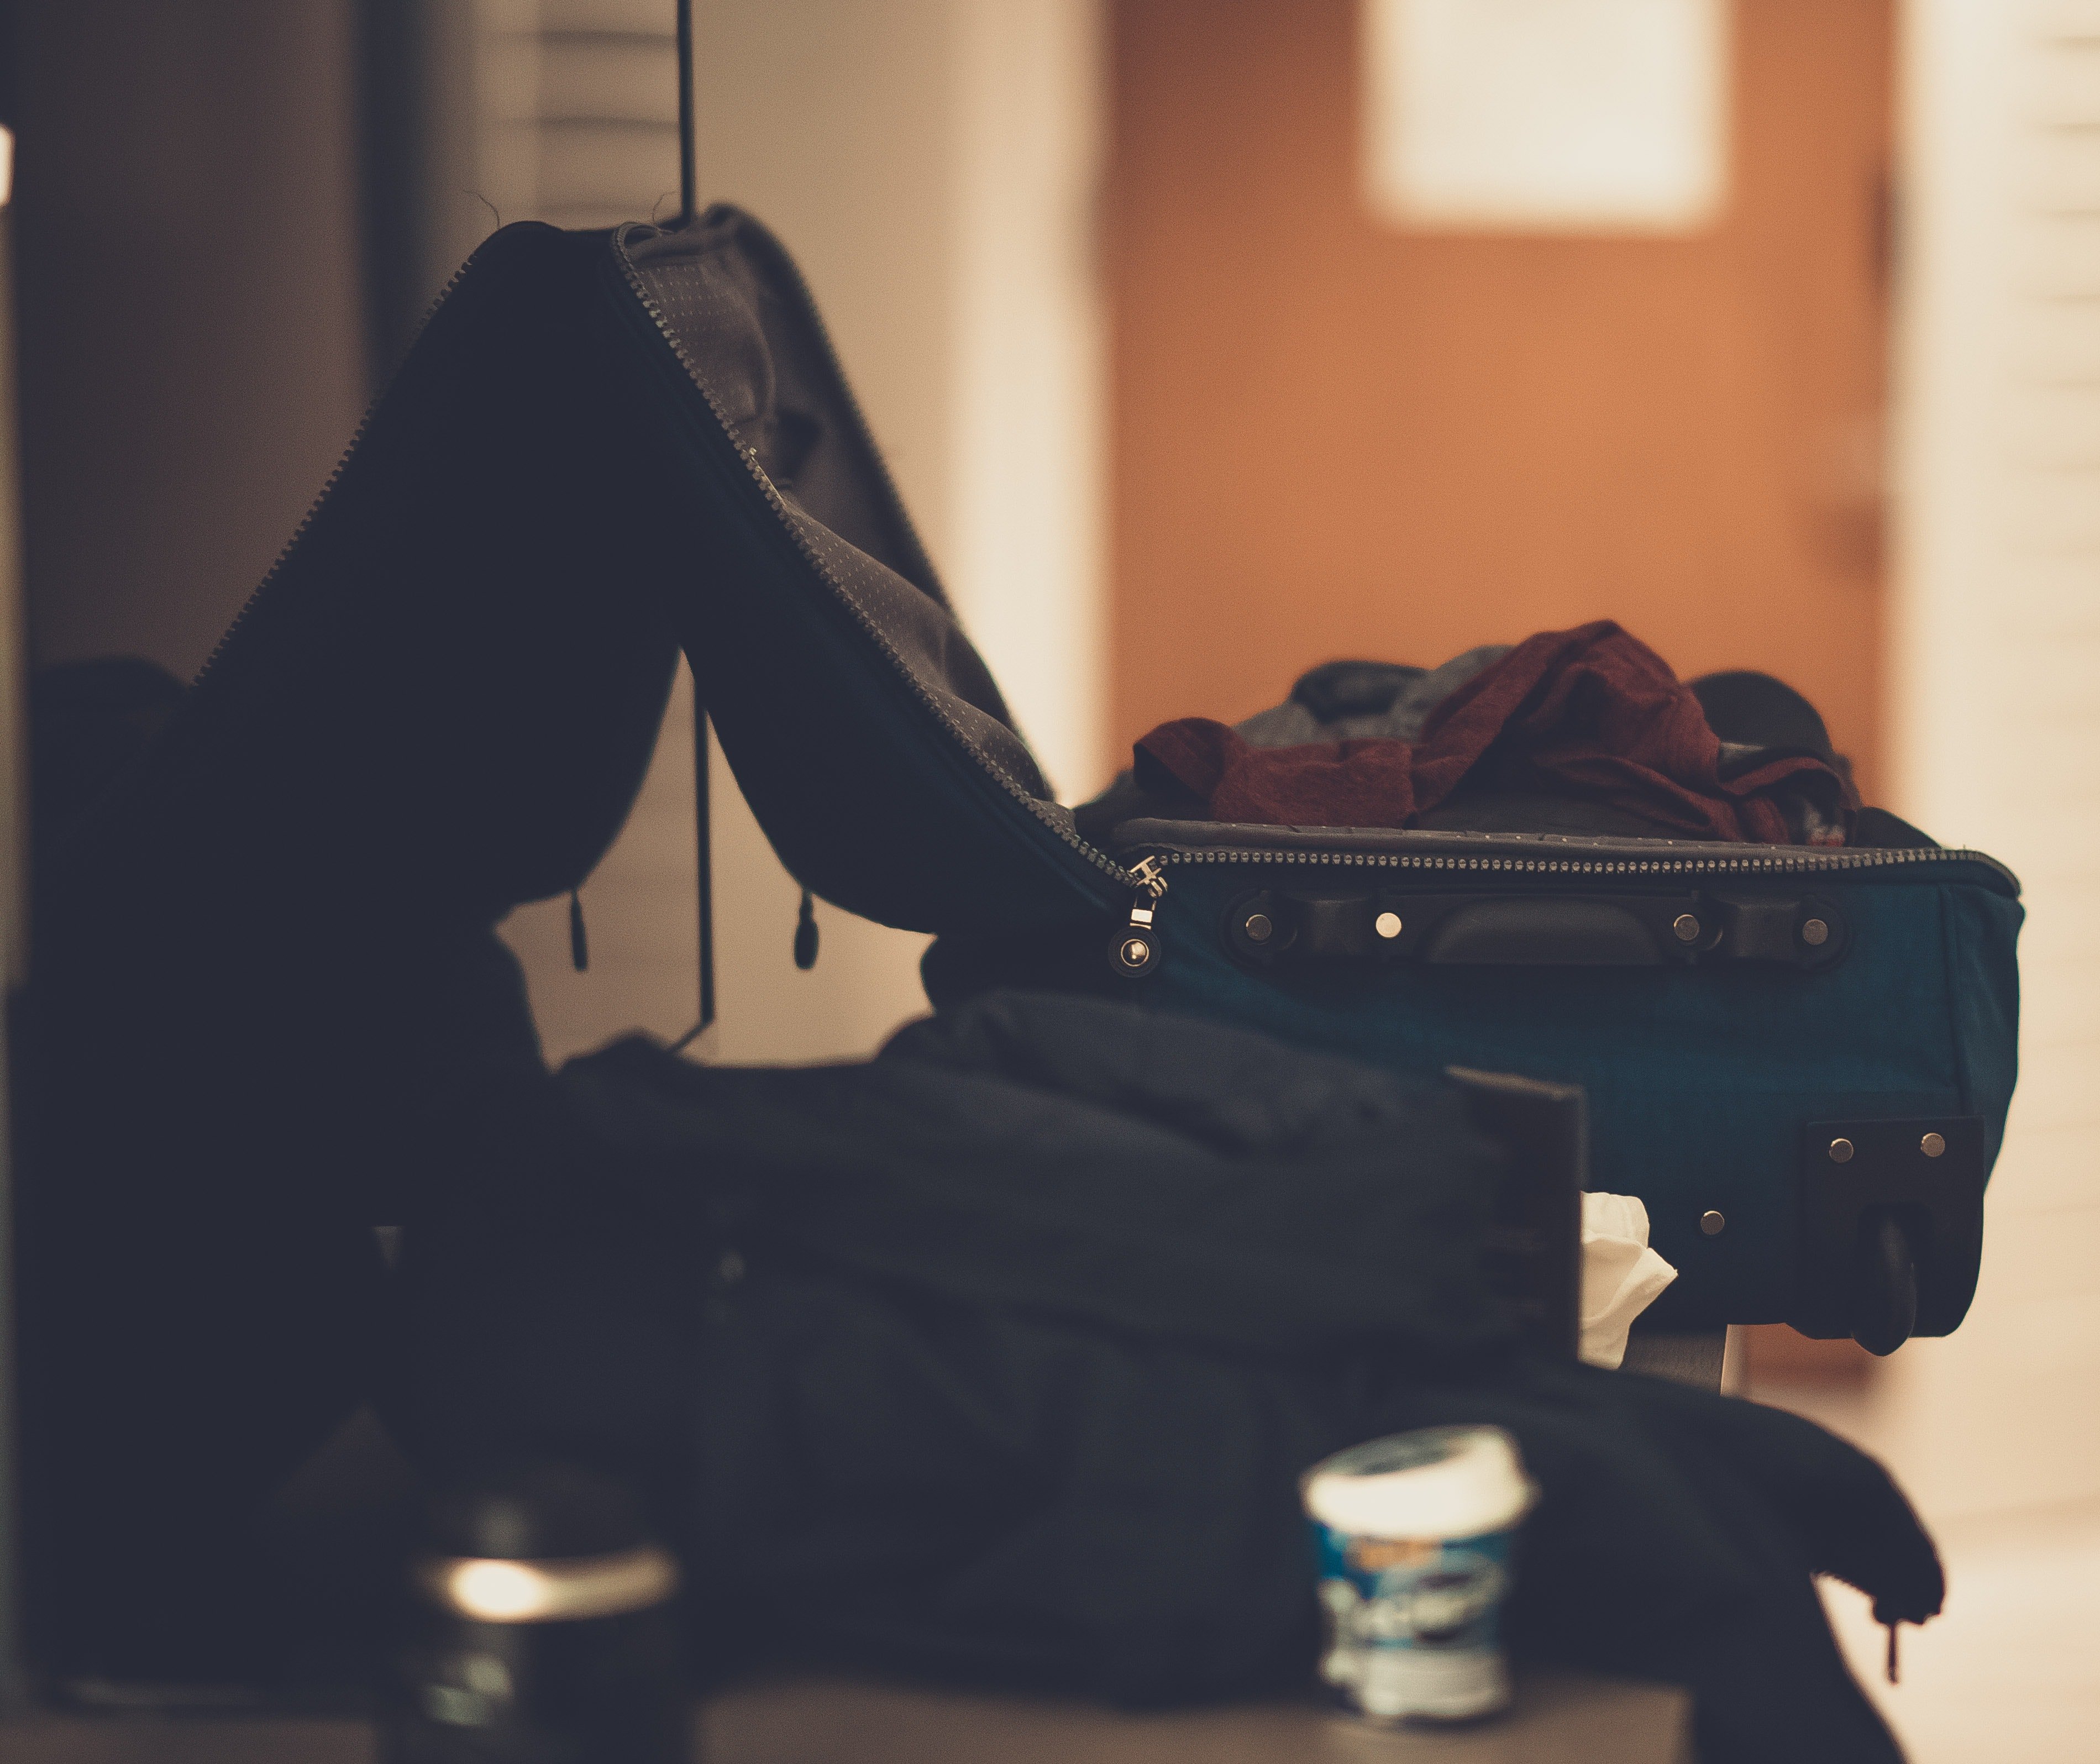 OP asks his mother to pack her bags | Photo: Pexels 